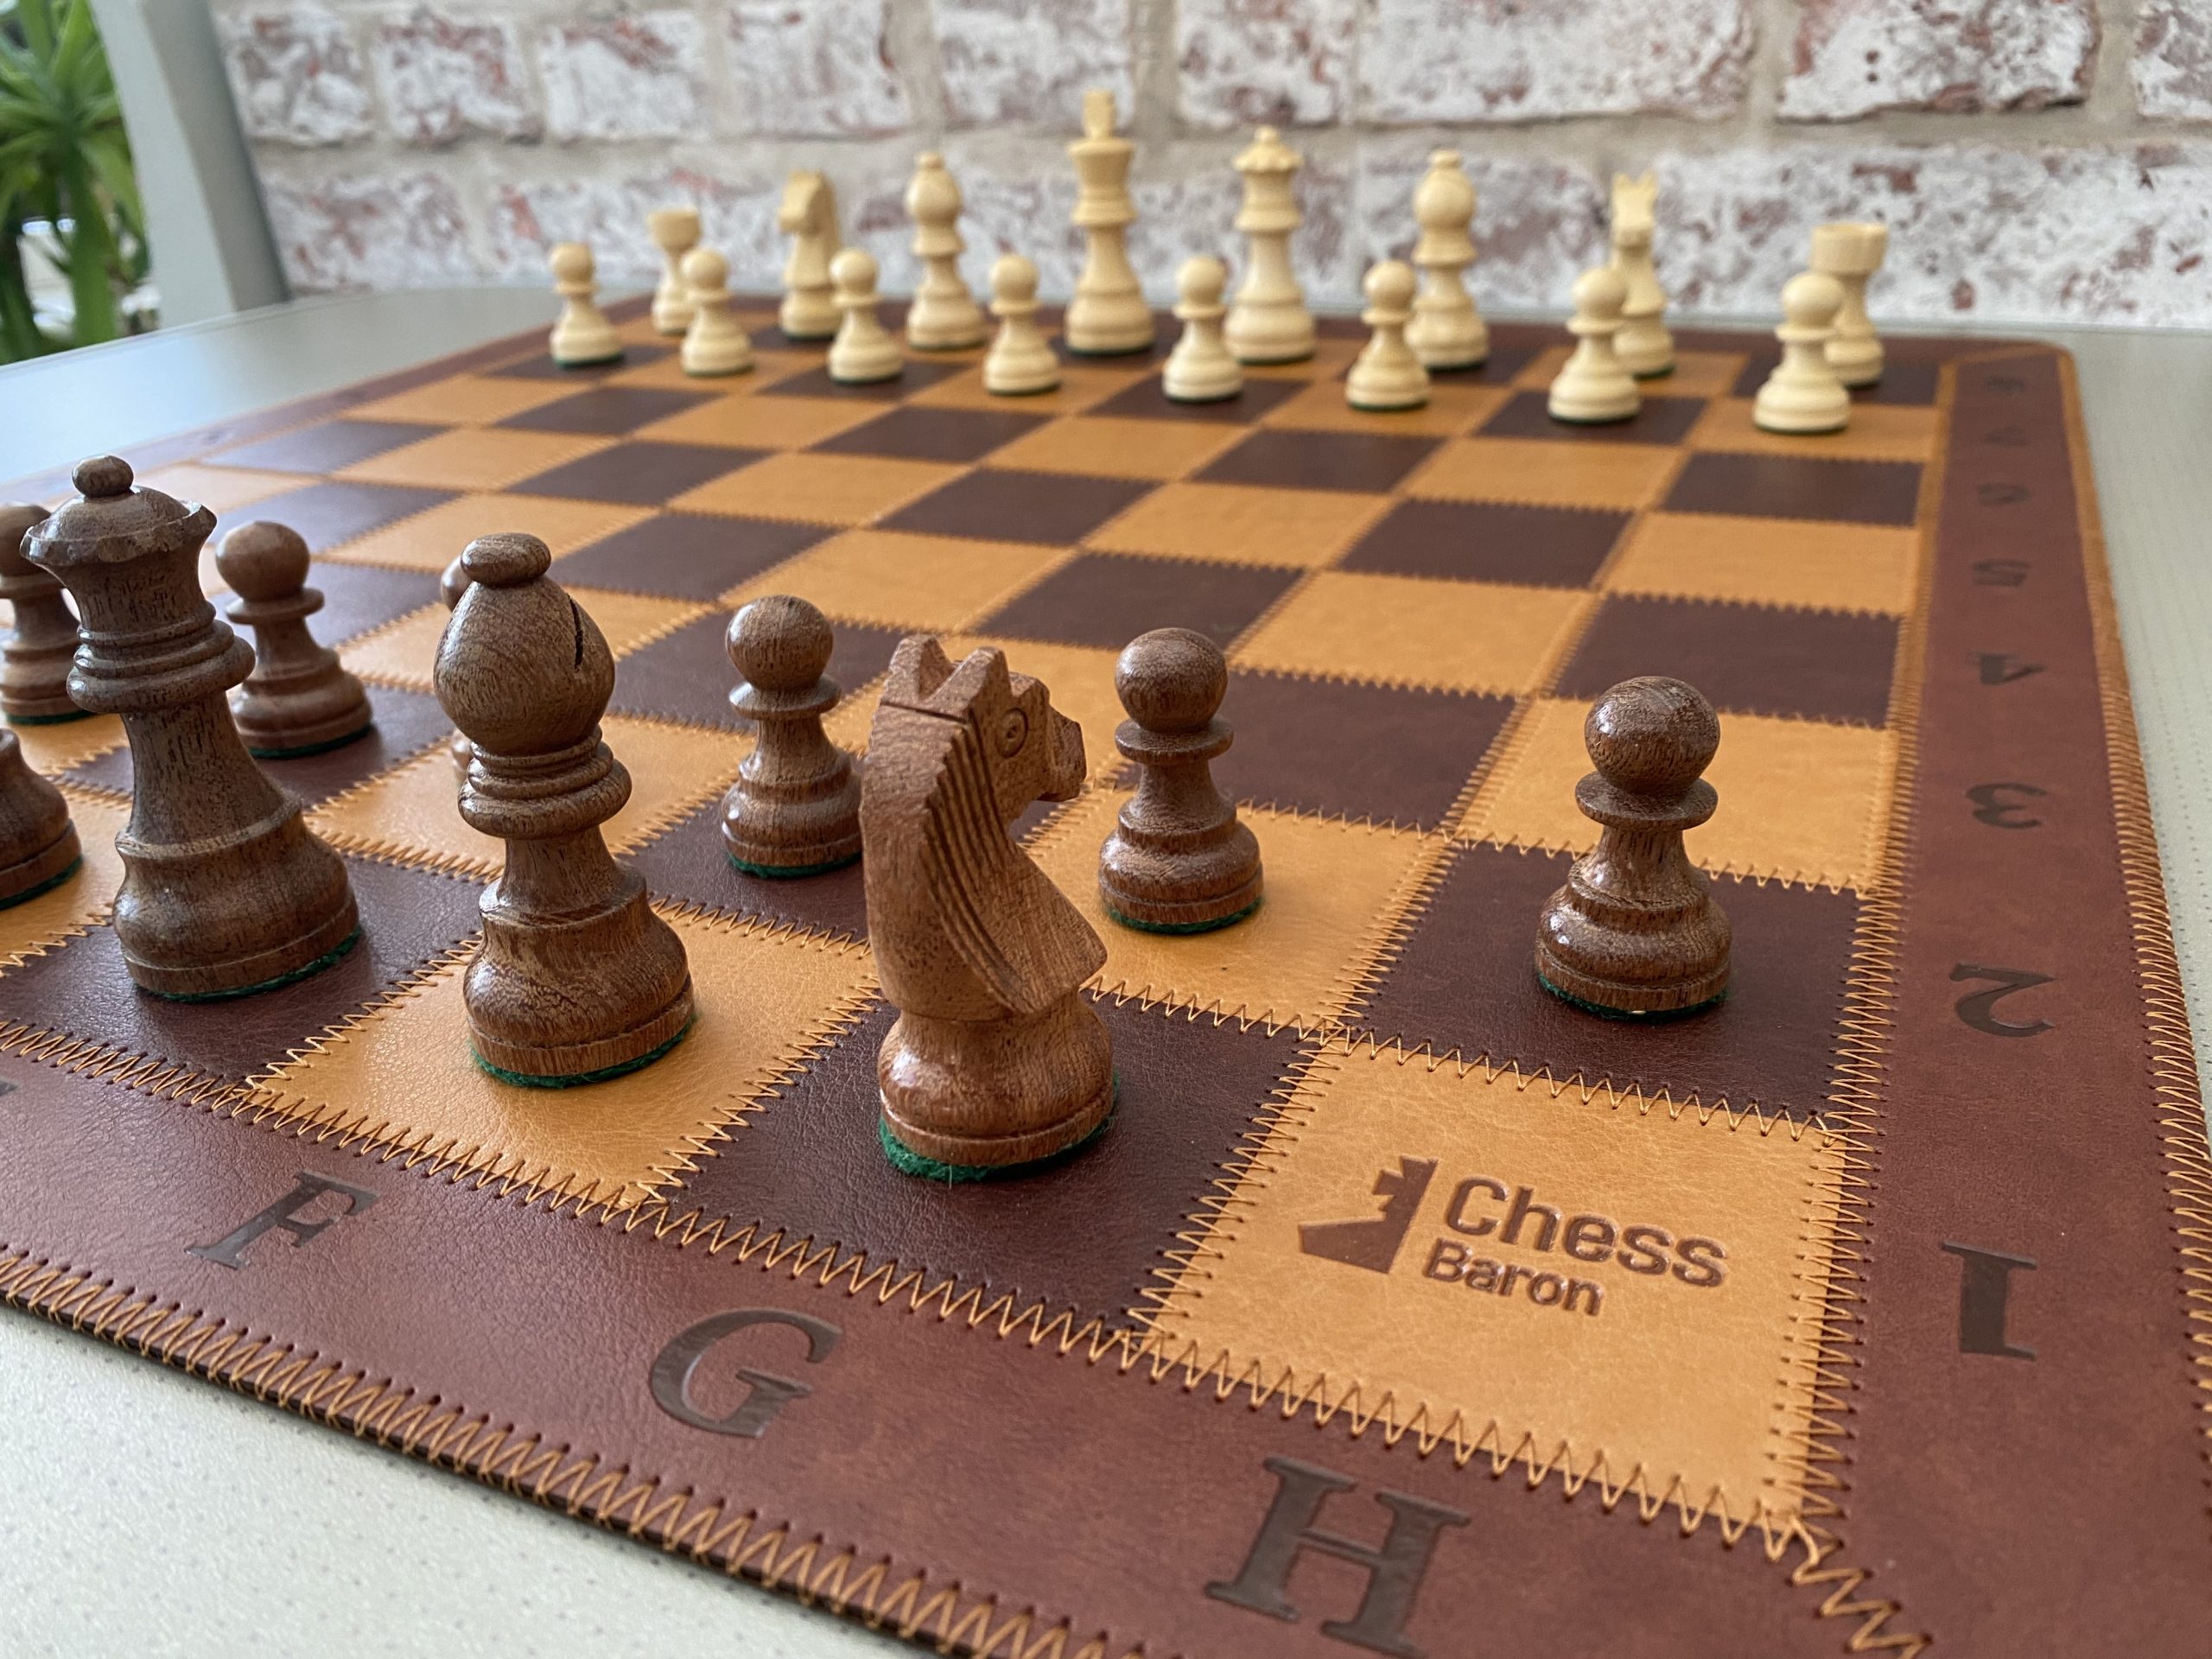 ChessBaron  Staunton Chess Sets, Heritage Chess, Chess Pieces, Boards,  Computers, Clocks, Backgammon. Pay by Card, Paypal or Crypto Currency  (Bitcoin, Etherium, etc.)